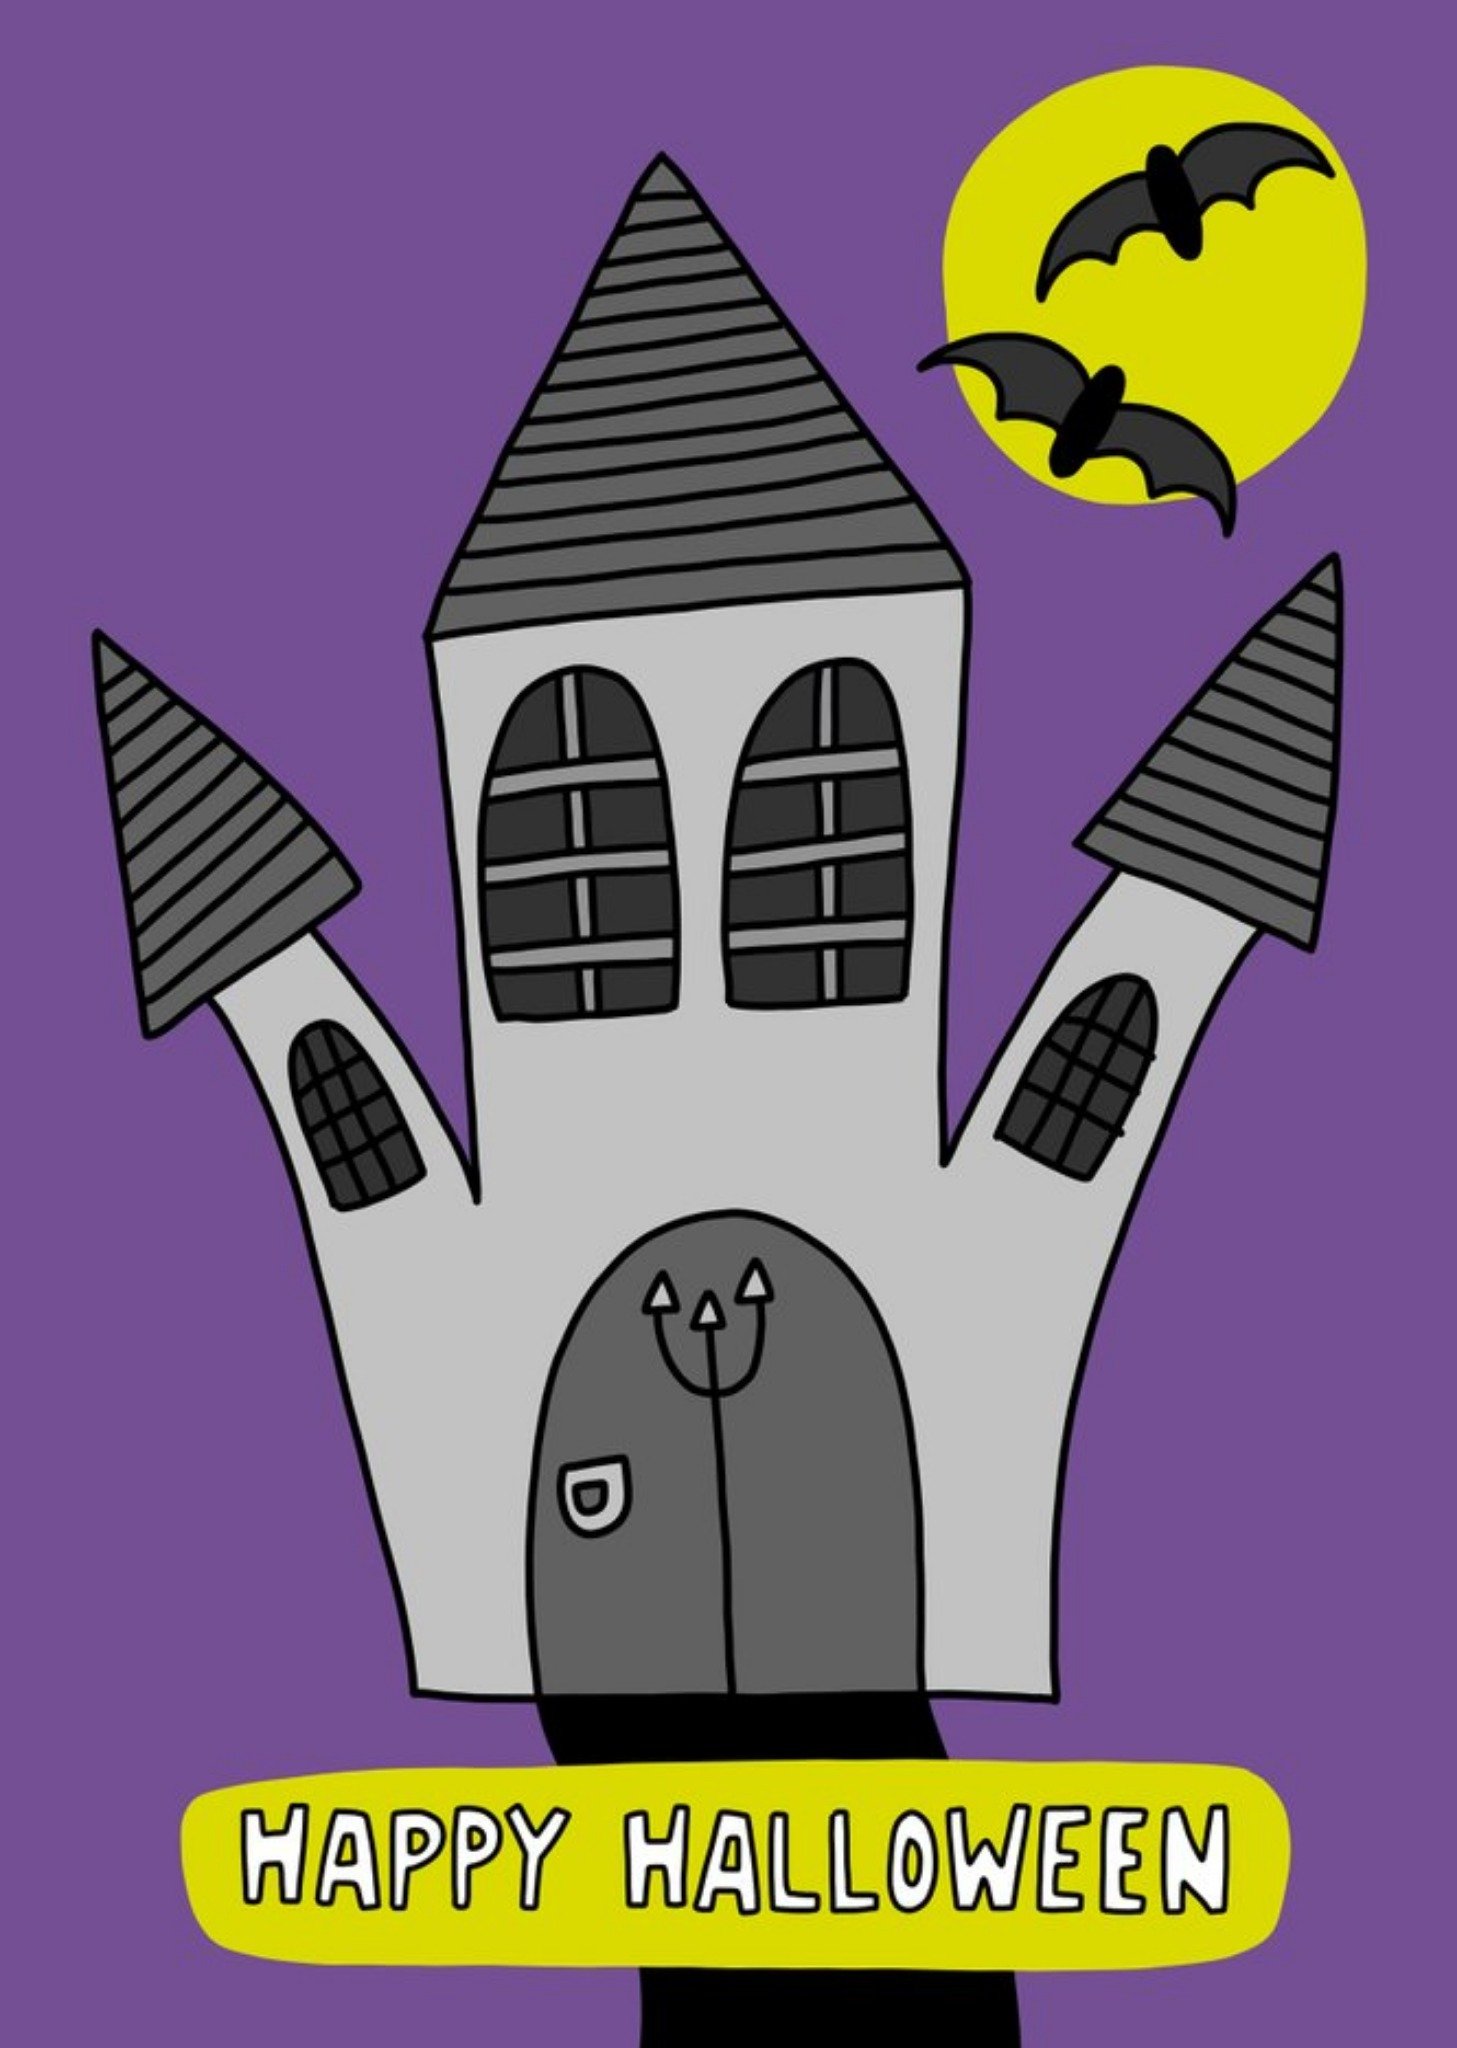 Moonpig Angela Chick Happy Halloween Card With Spooky Castle, Large